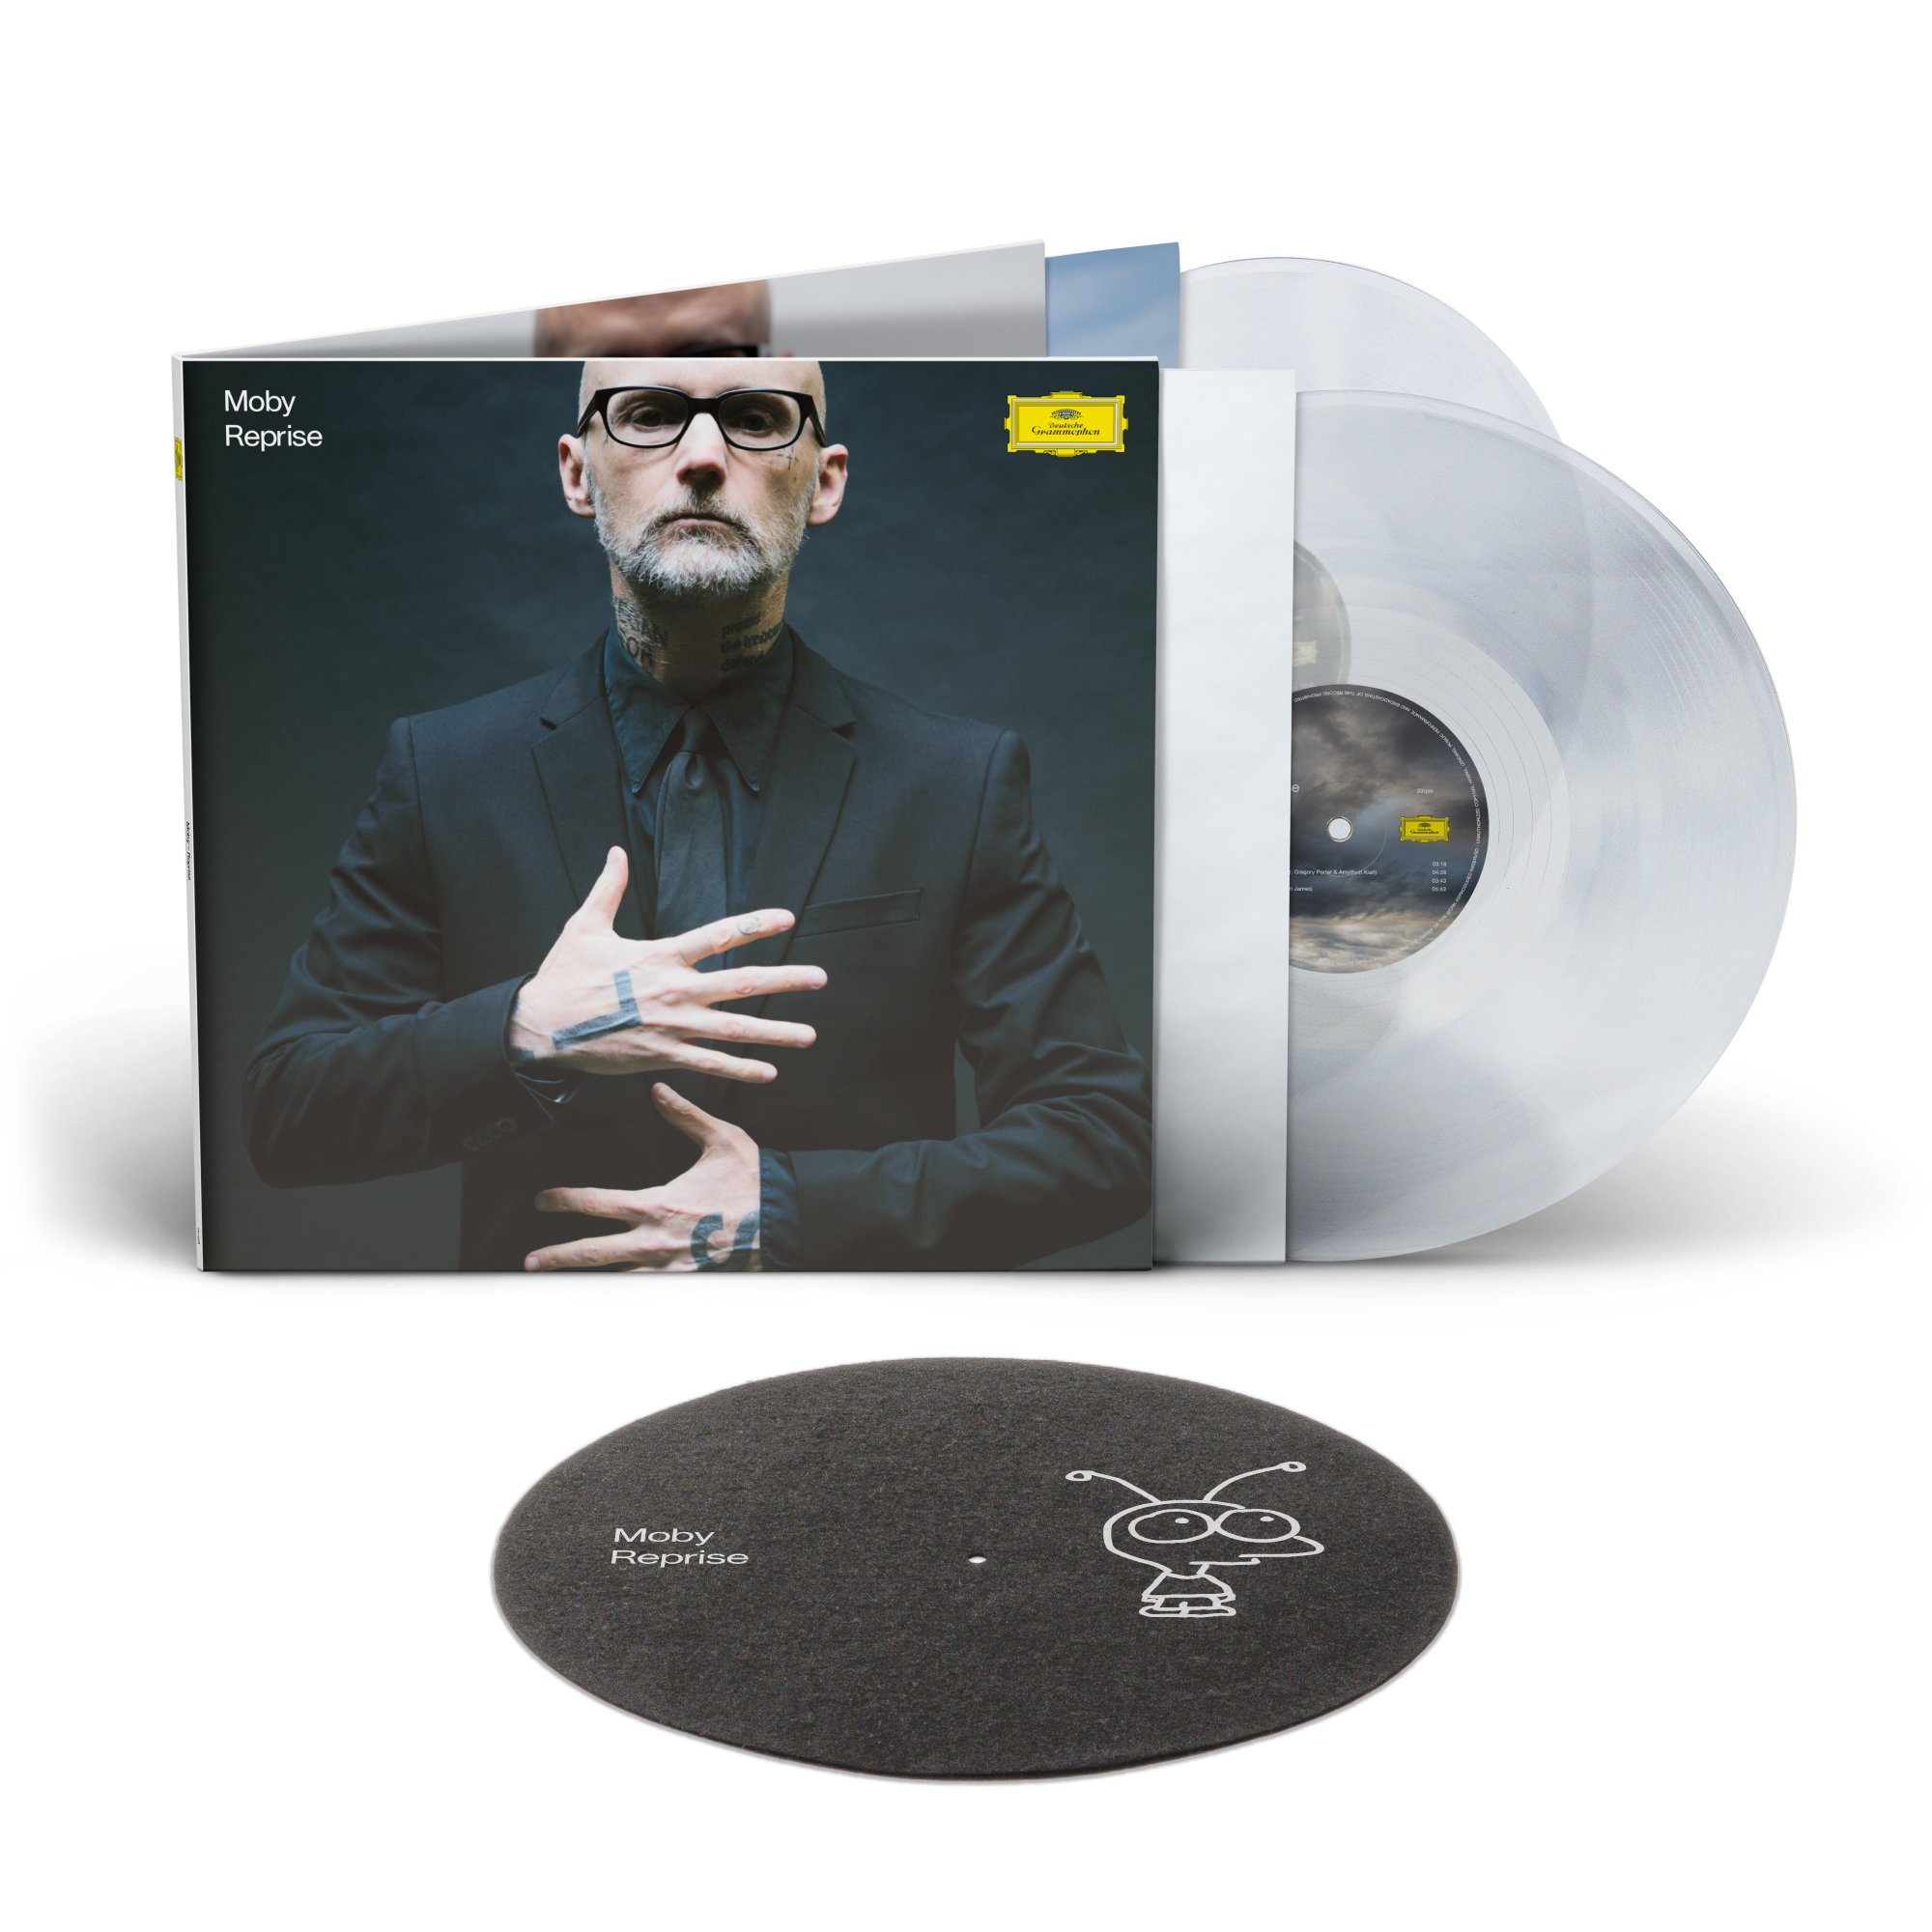 MOBY - Reprise: Exclusive Deluxe 180gm Crystal Clear Vinyl 2LP + Little Idiot Slipmat